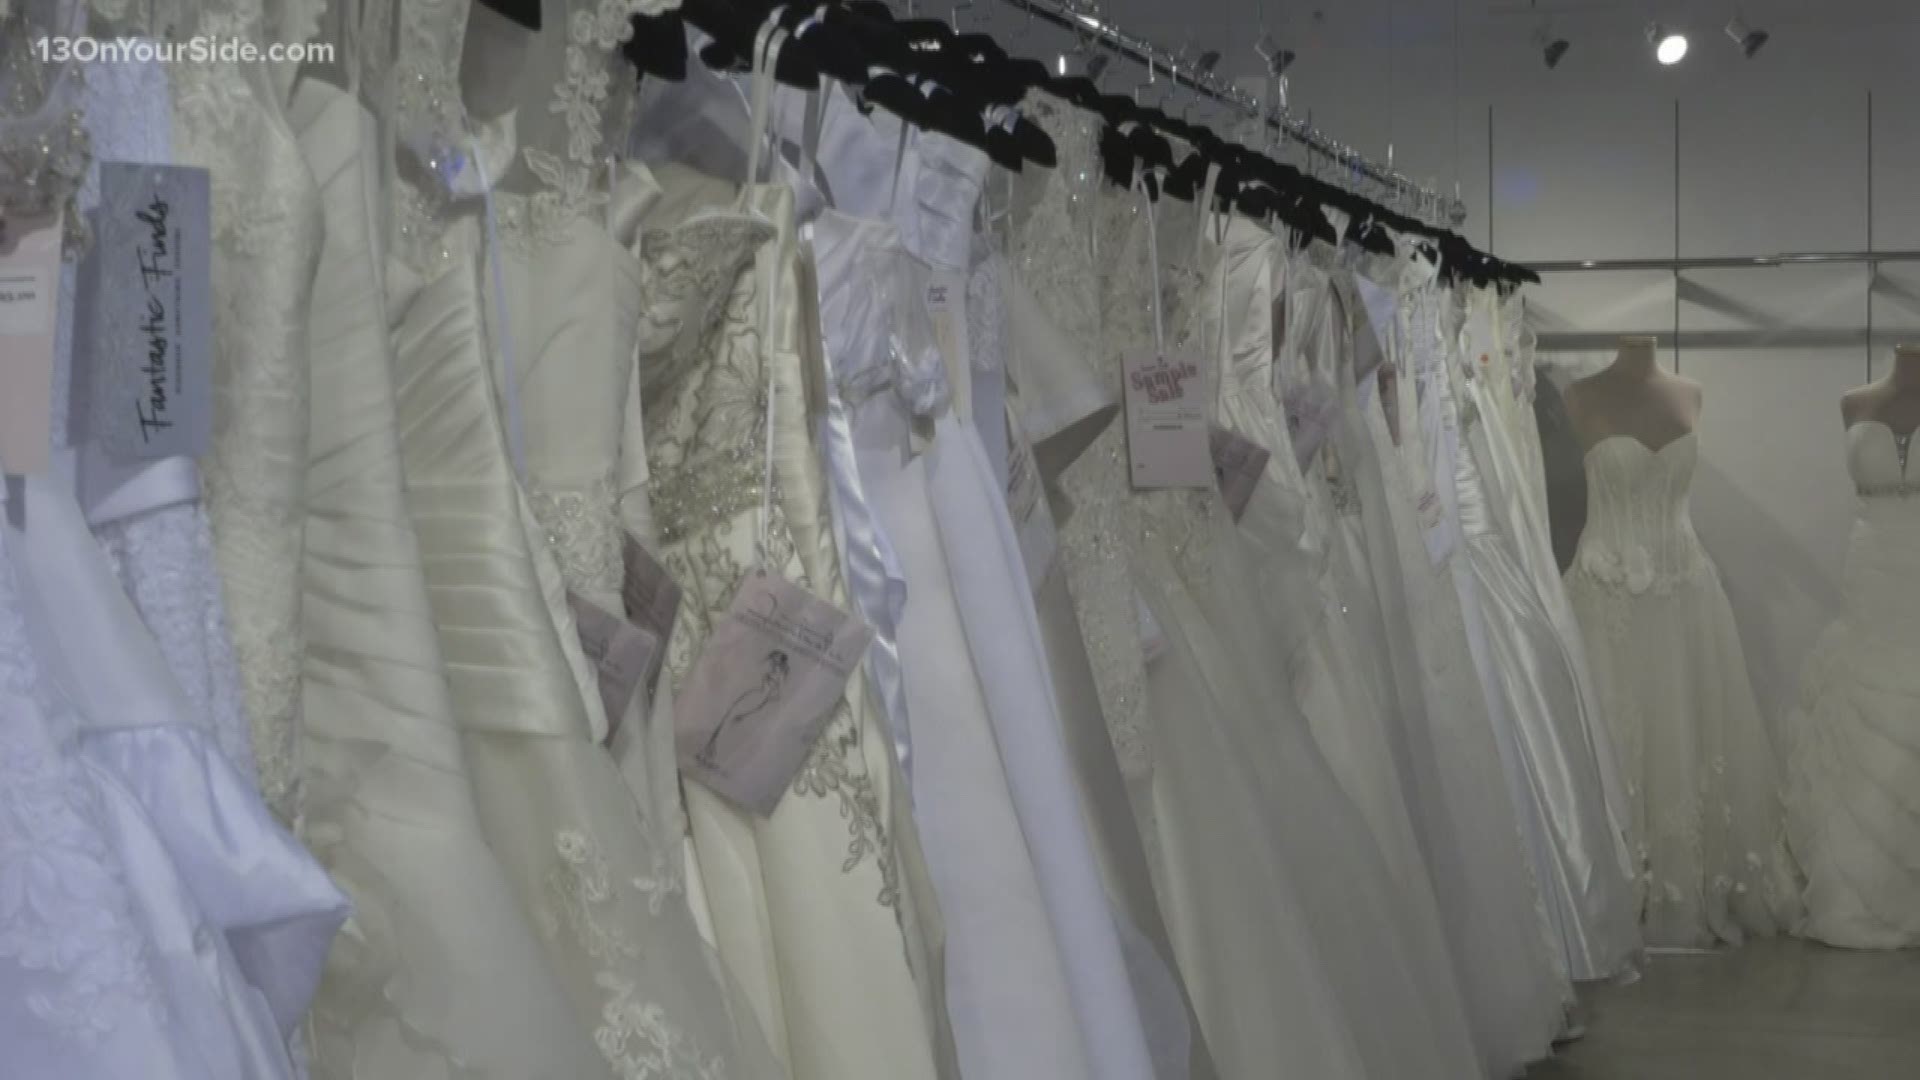 Lansing store gives free dresses to military brides